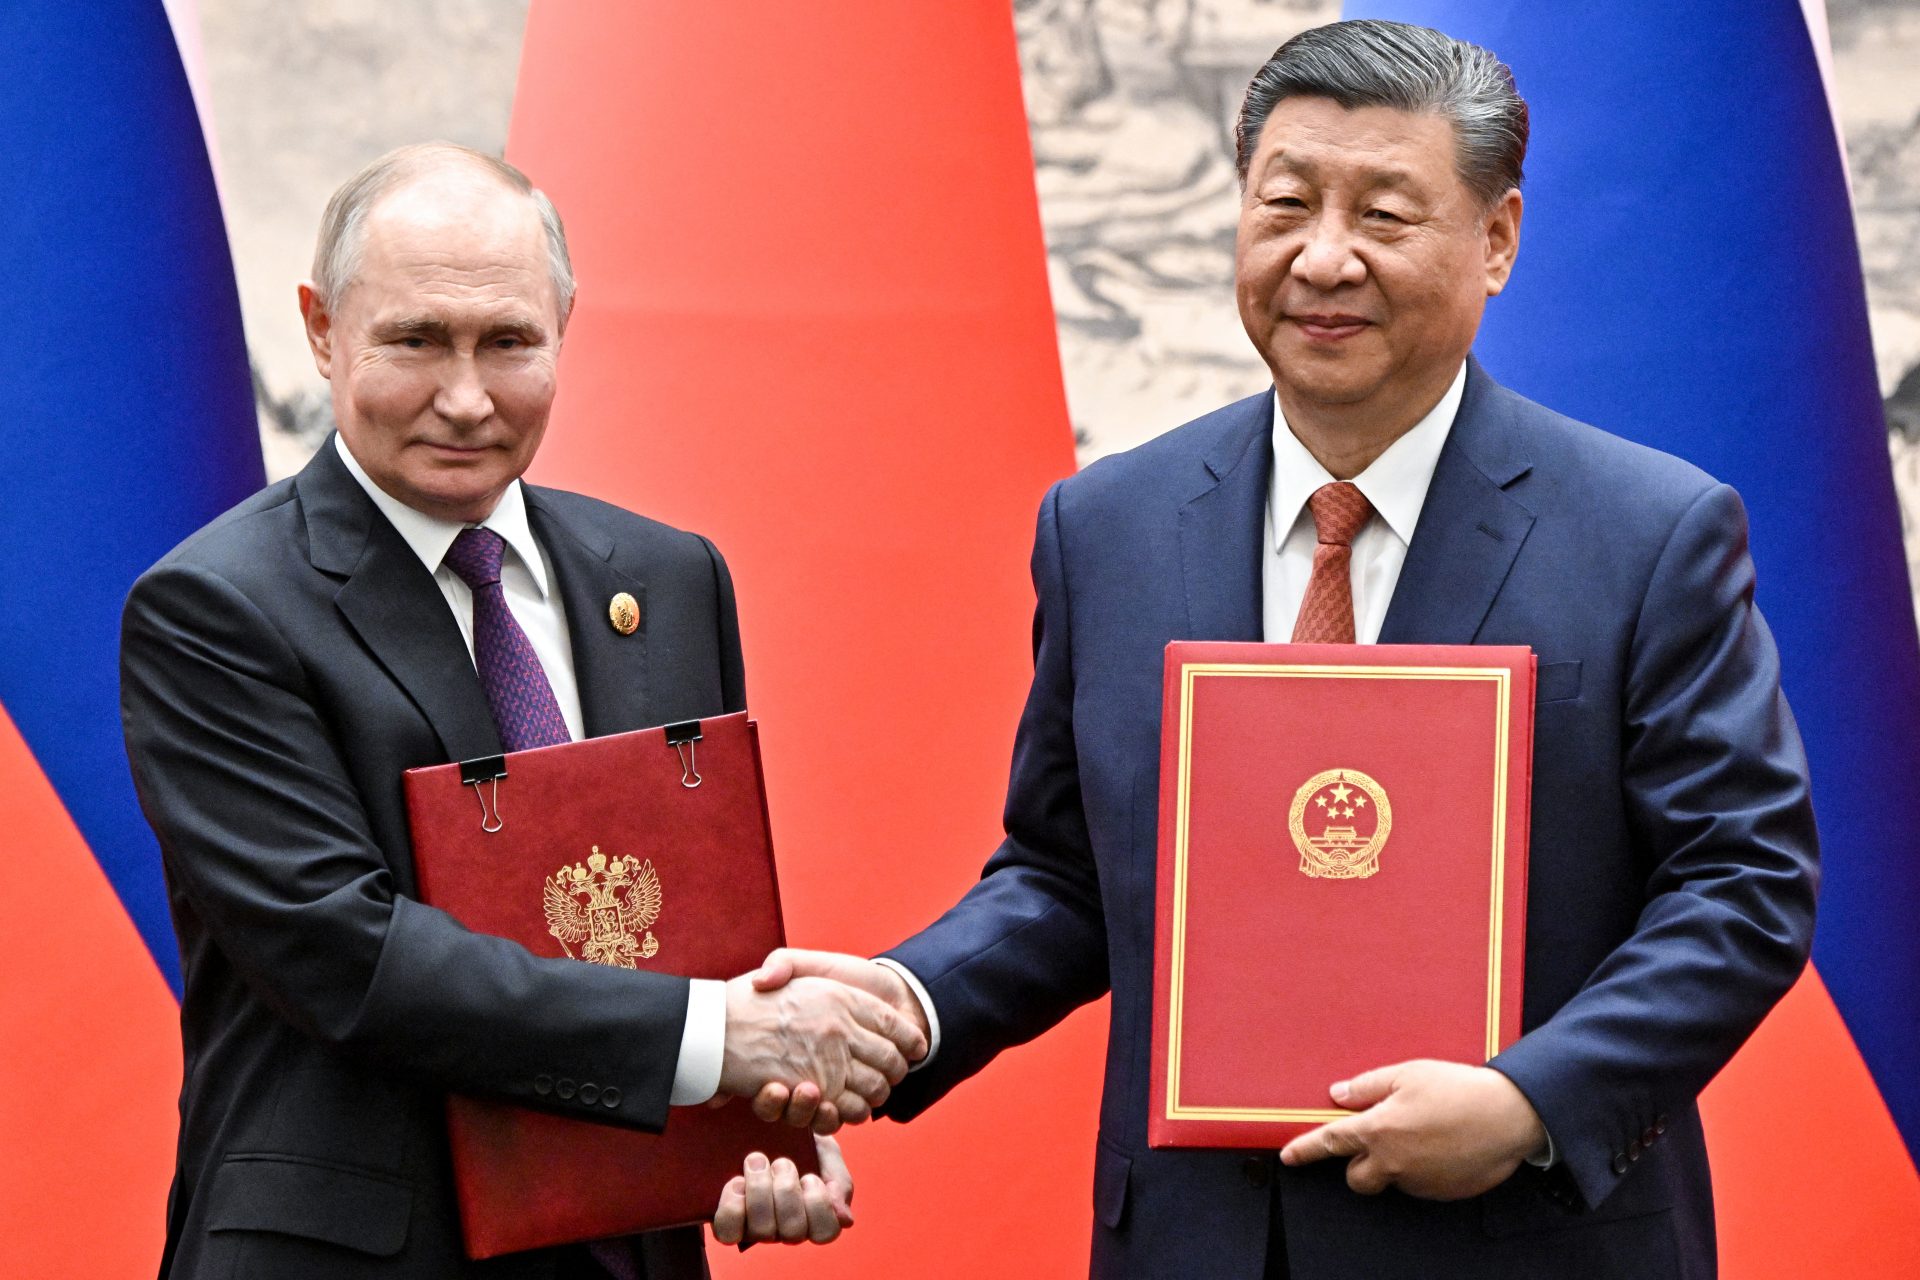 Putin and Xi reaffirm Russia-China friendship in a Beijing state visit